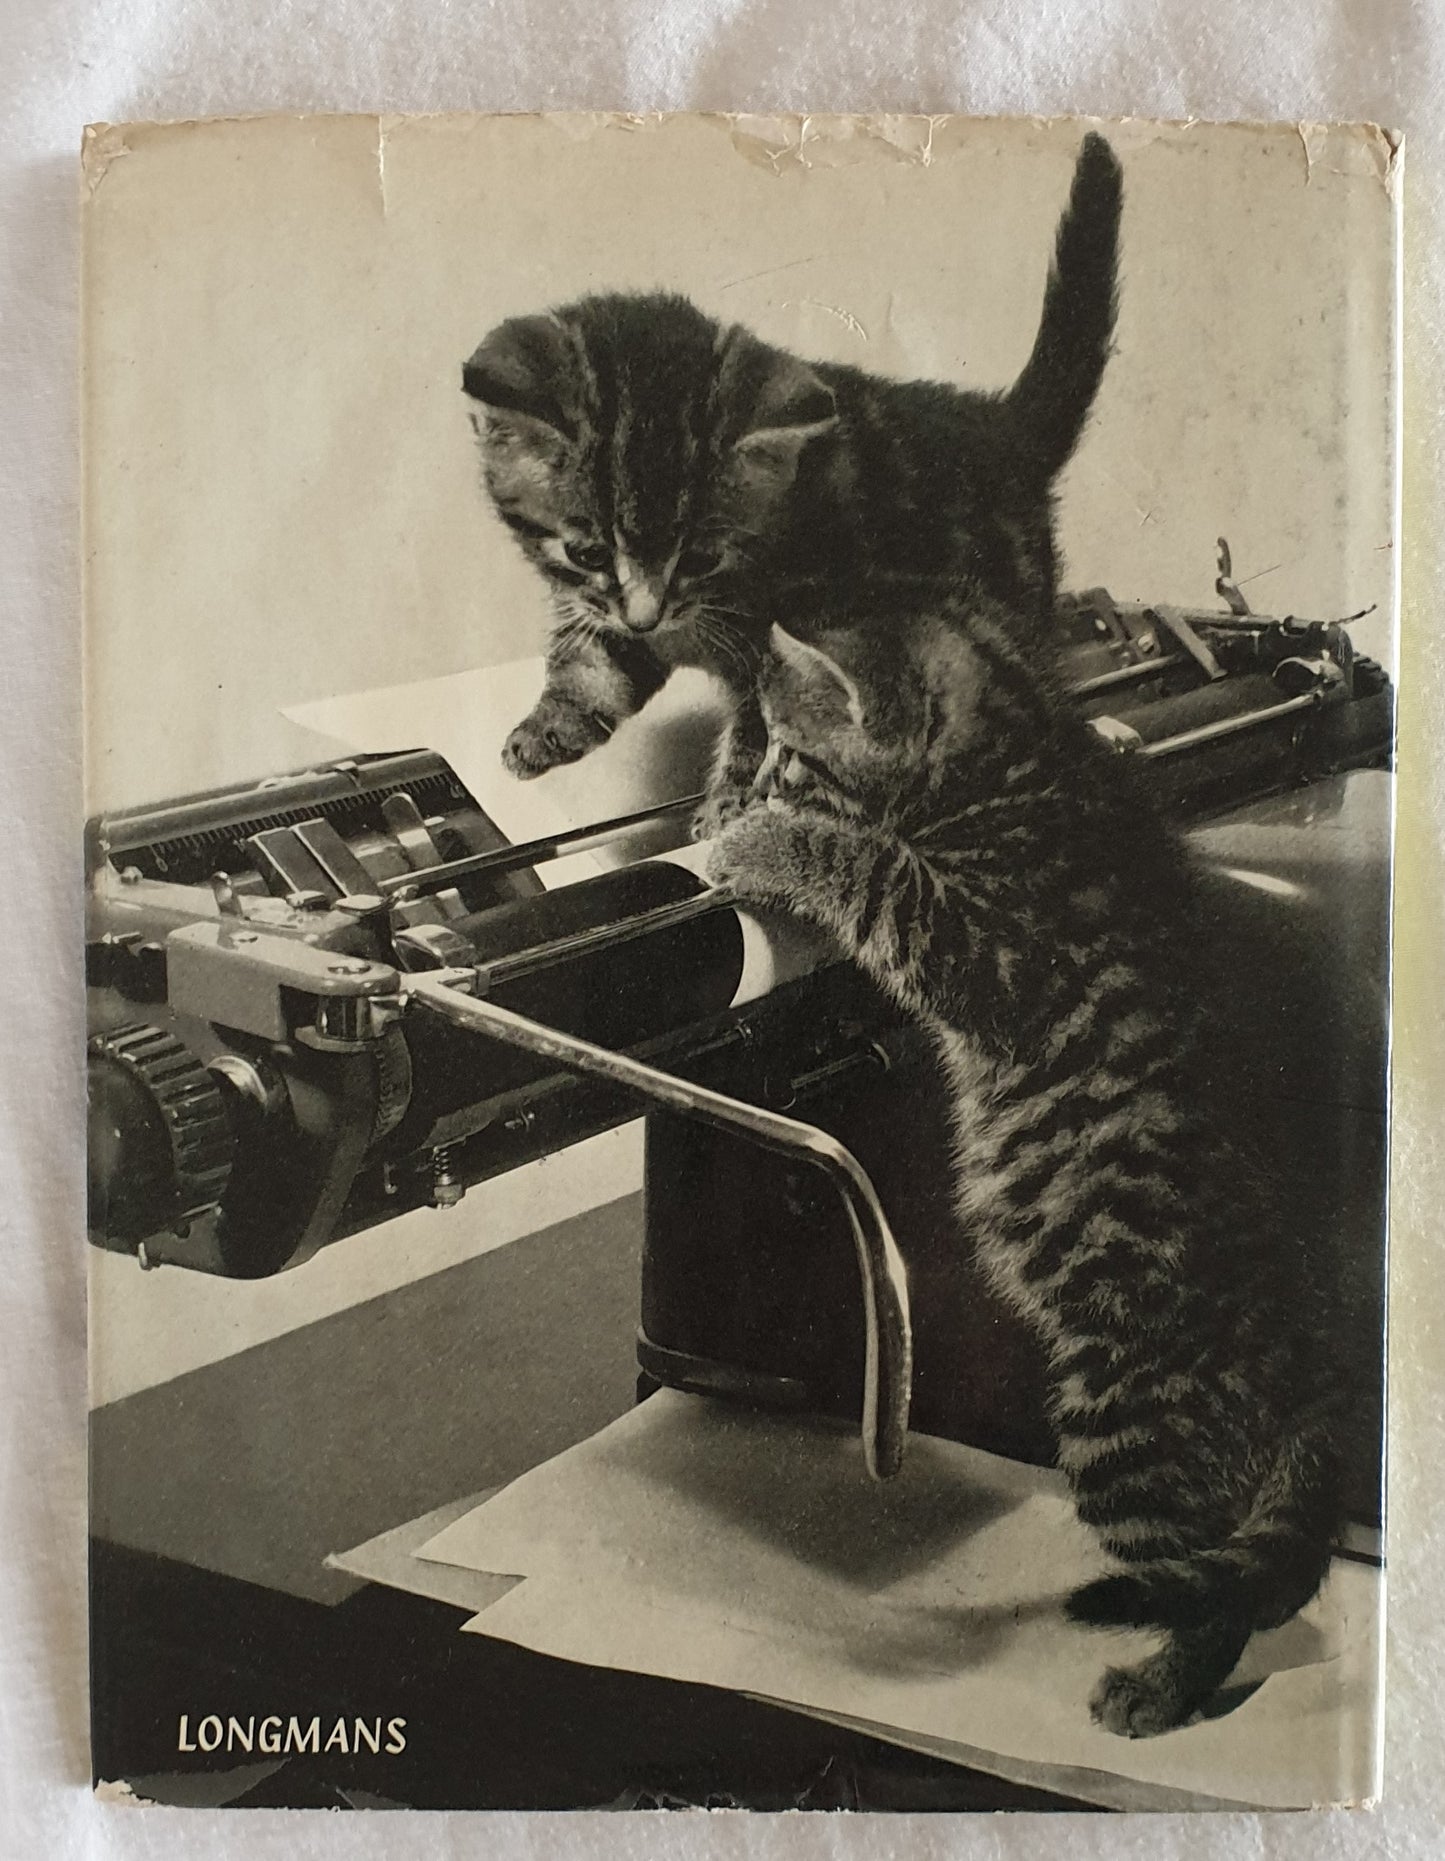 Kittens on the Keys by Ron Spillman and Jack Ramsay